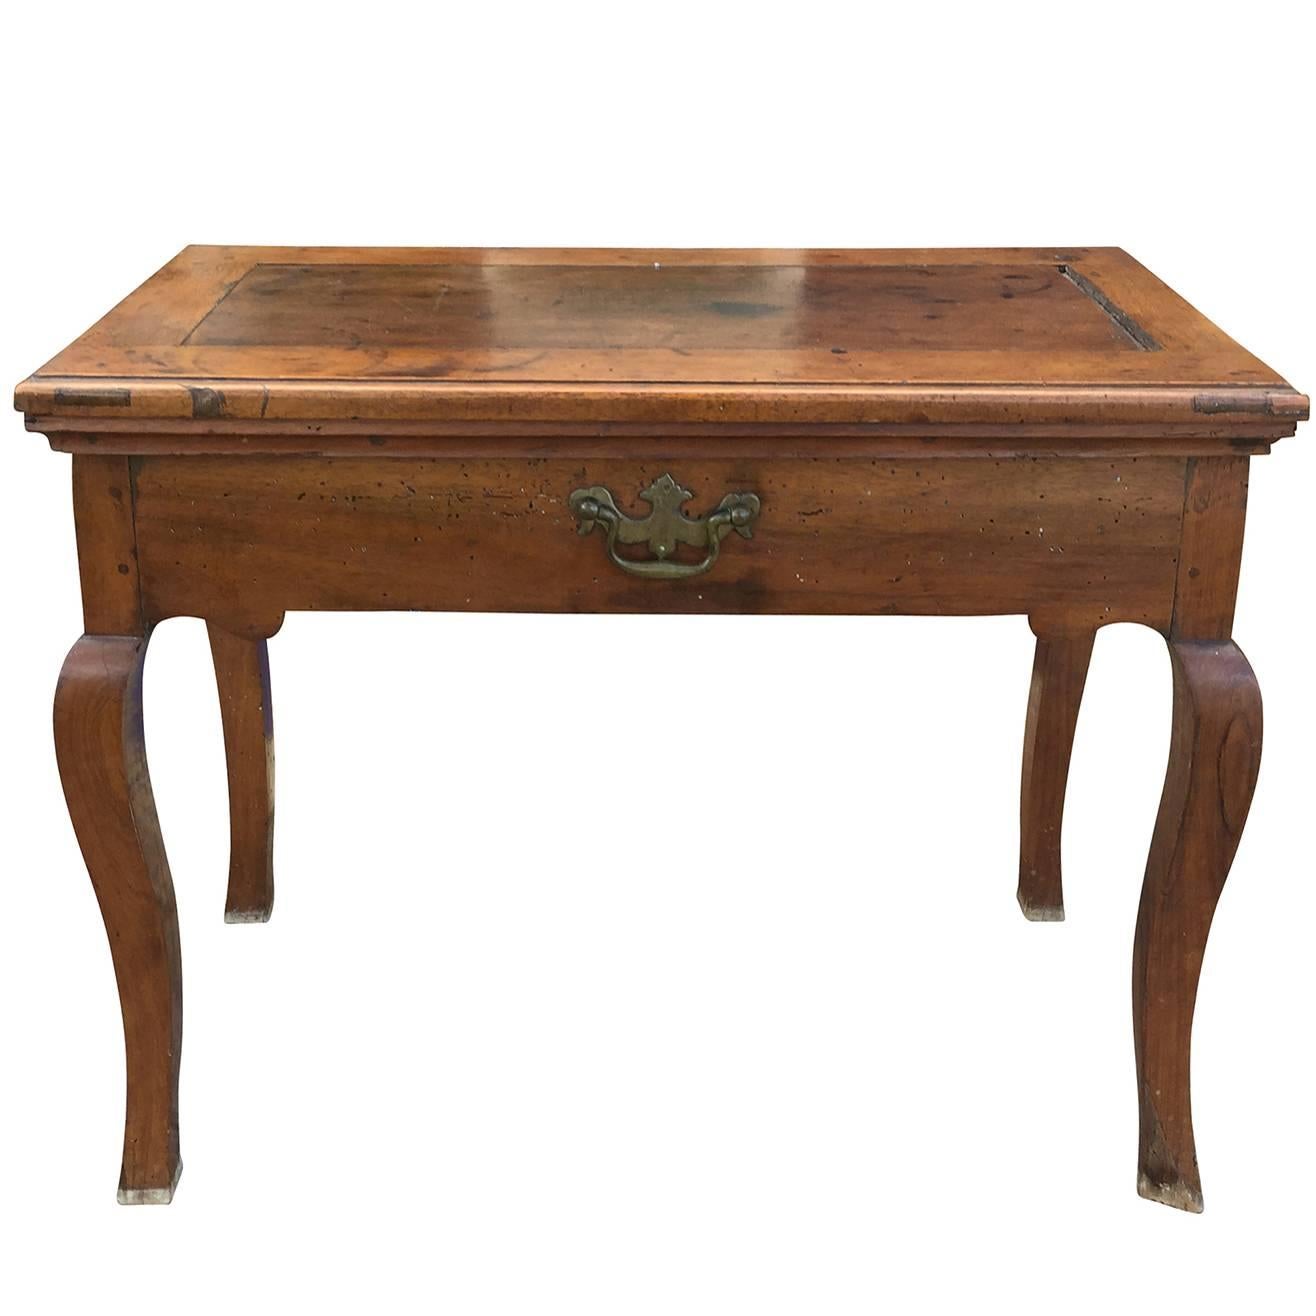 18th-19th Century French Fruitwood Table, Bucket Inside